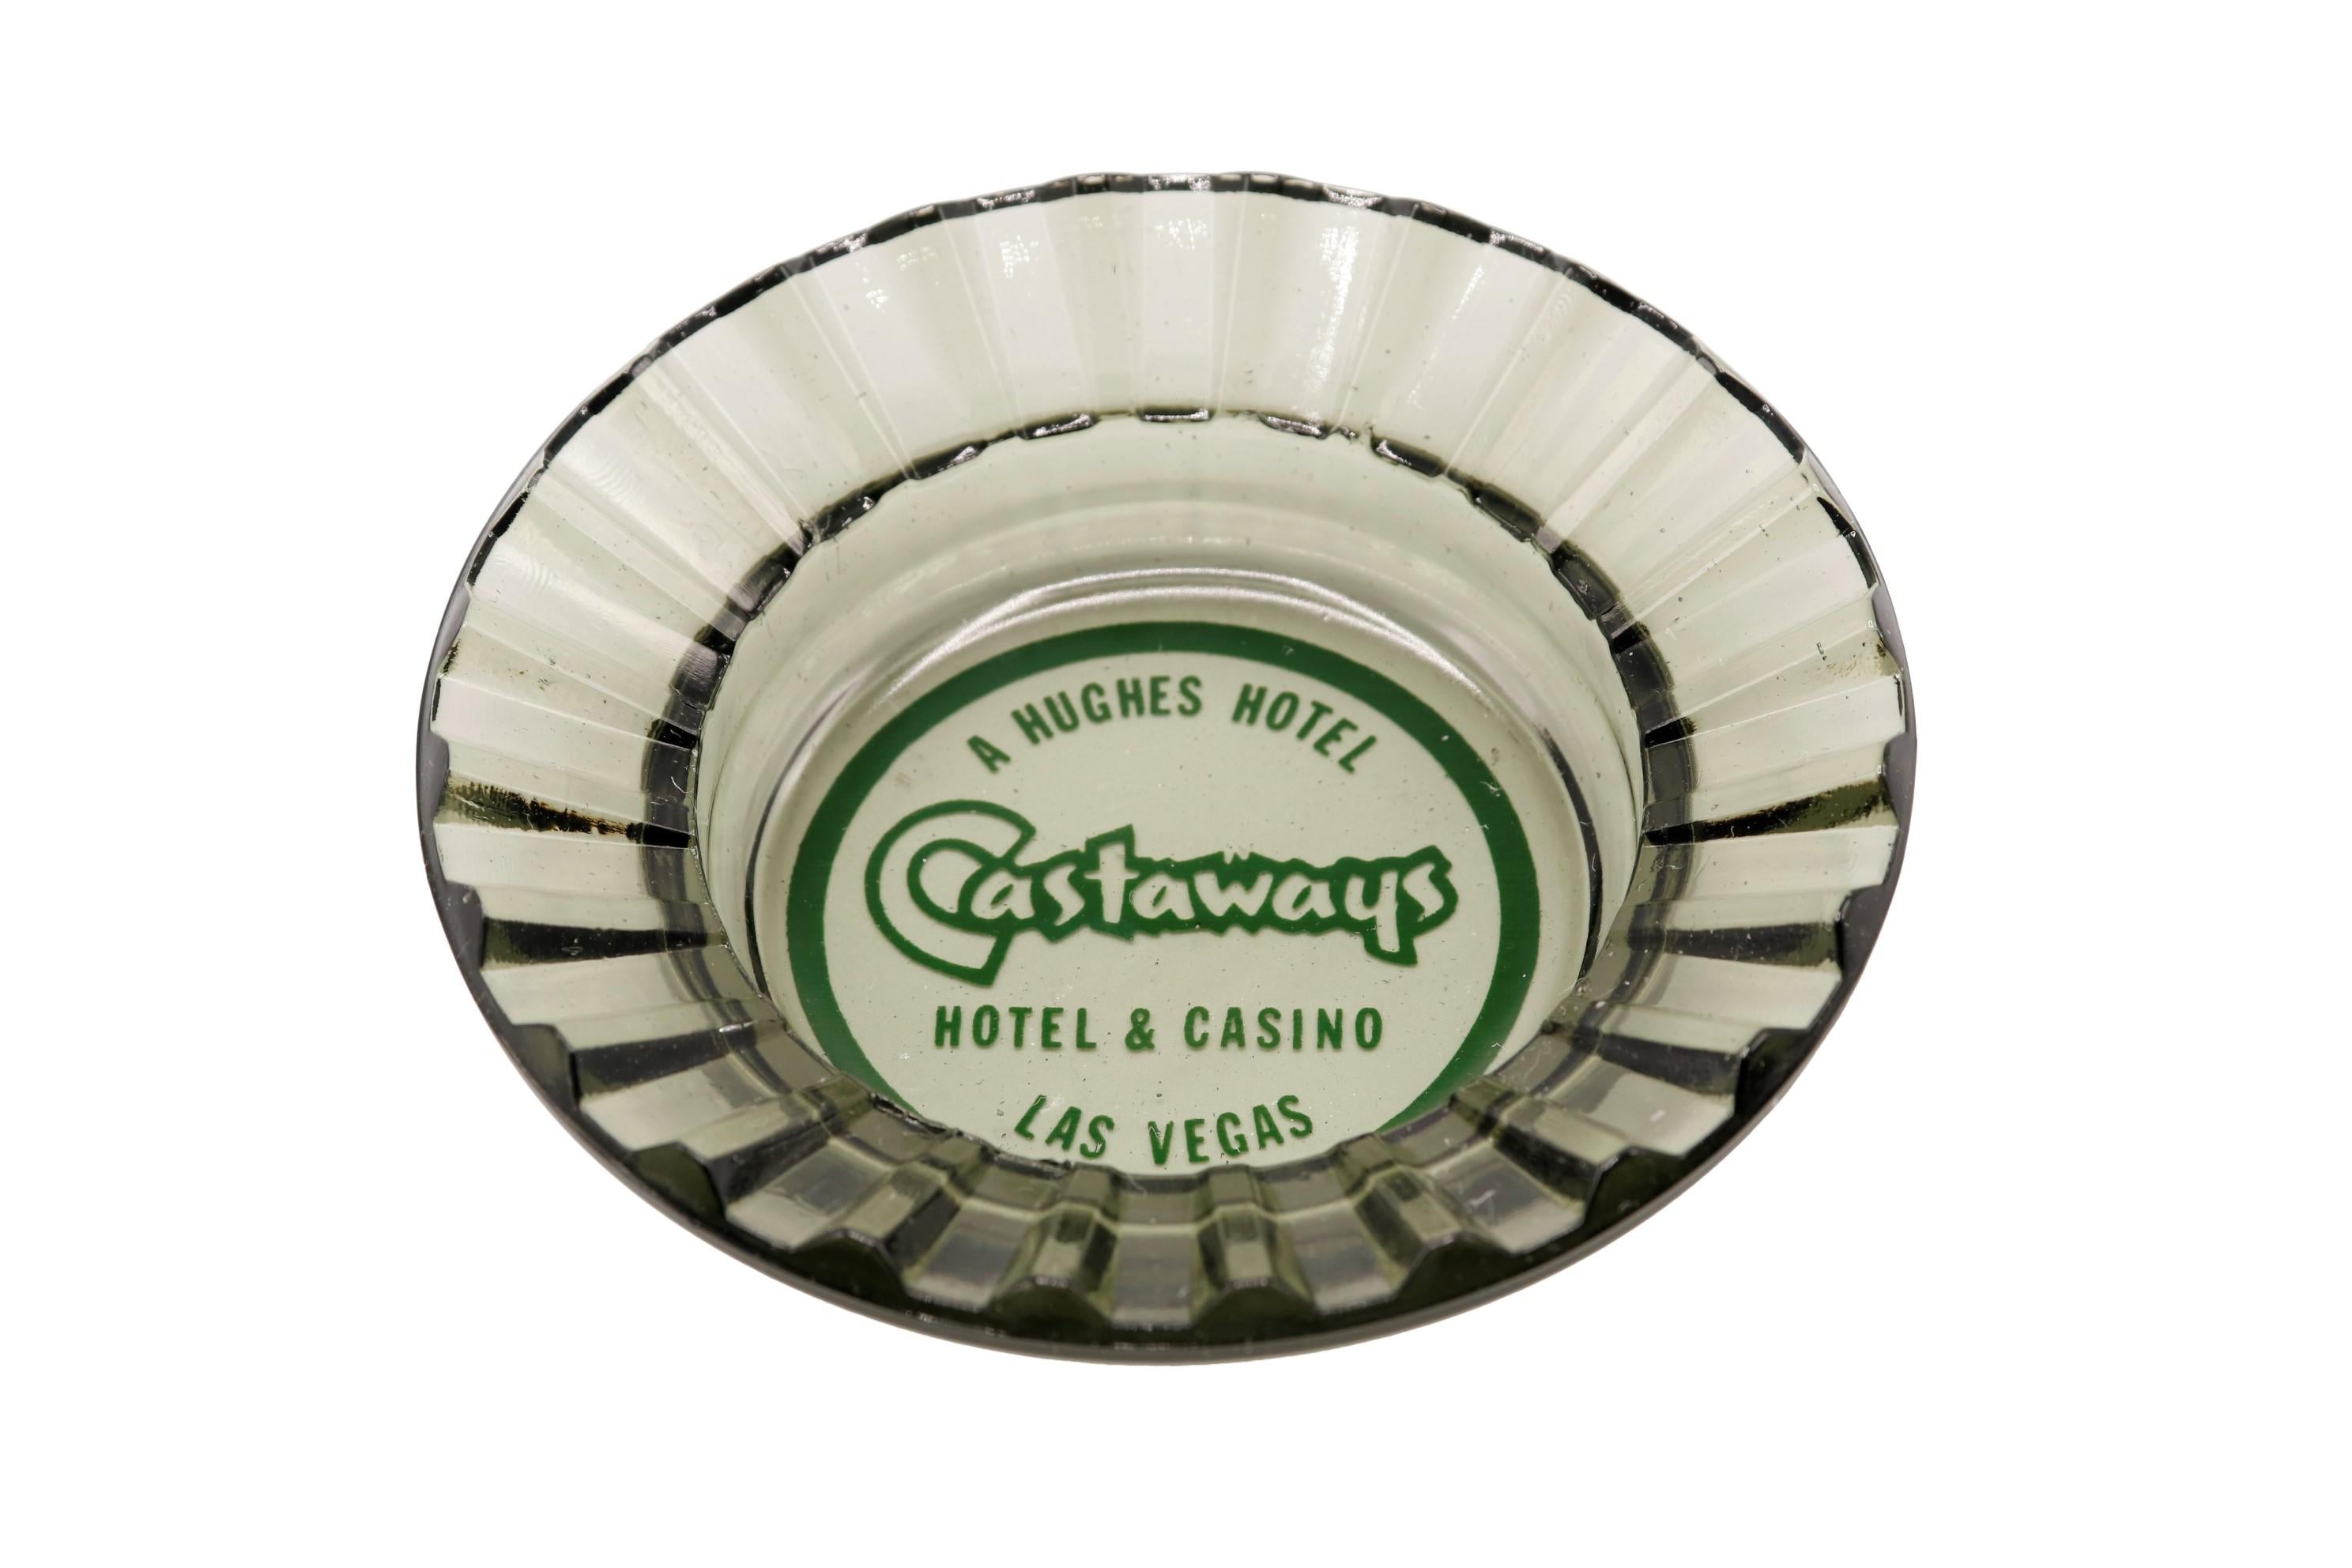 A pair of gray tinted glass ashtrays from The Castaways Hotel, a hotel and casino in Paradise, Las Vegas, Nevada. The center is printed with a green circle branded with the Castaways logo. The hotel was opened in 1963, purchased in 1967 by